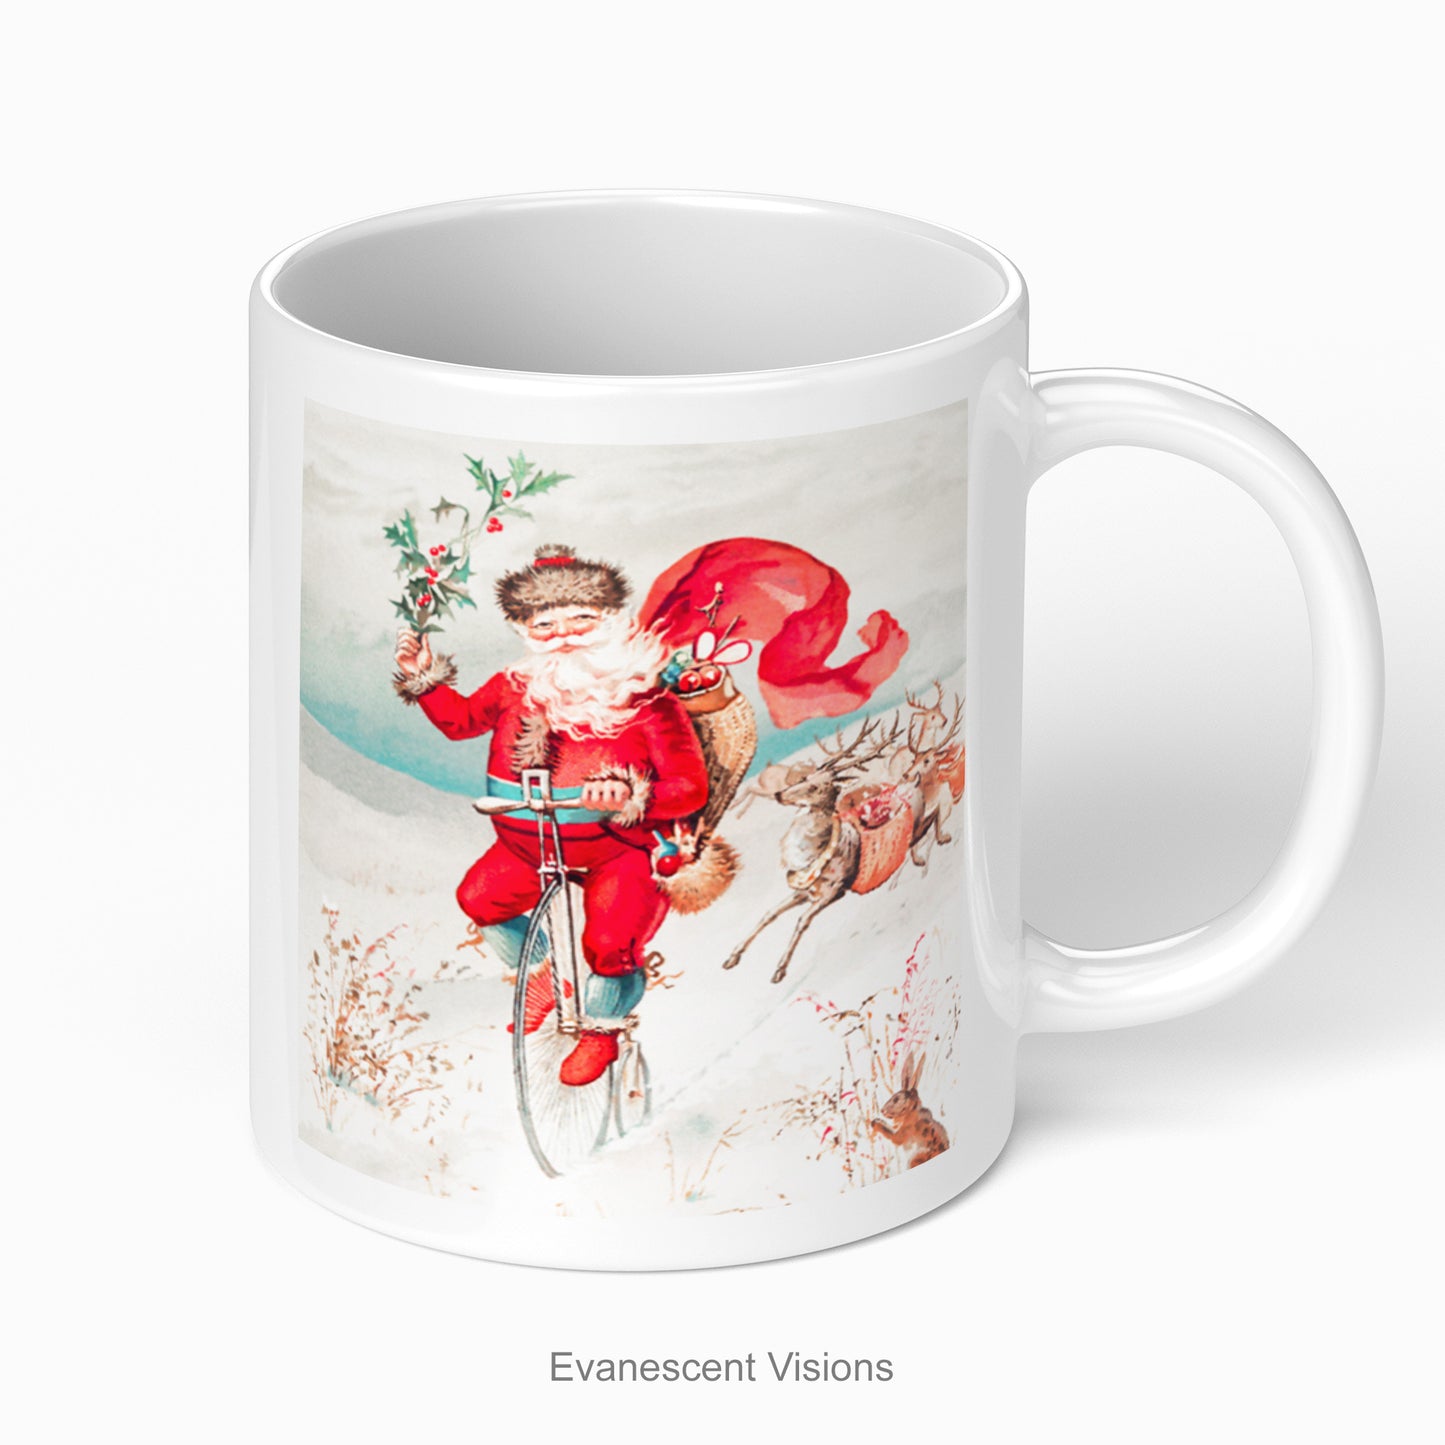 Santa Christmas Mug, with a vintage painting of Santa on a Penny Farthing bycicle.